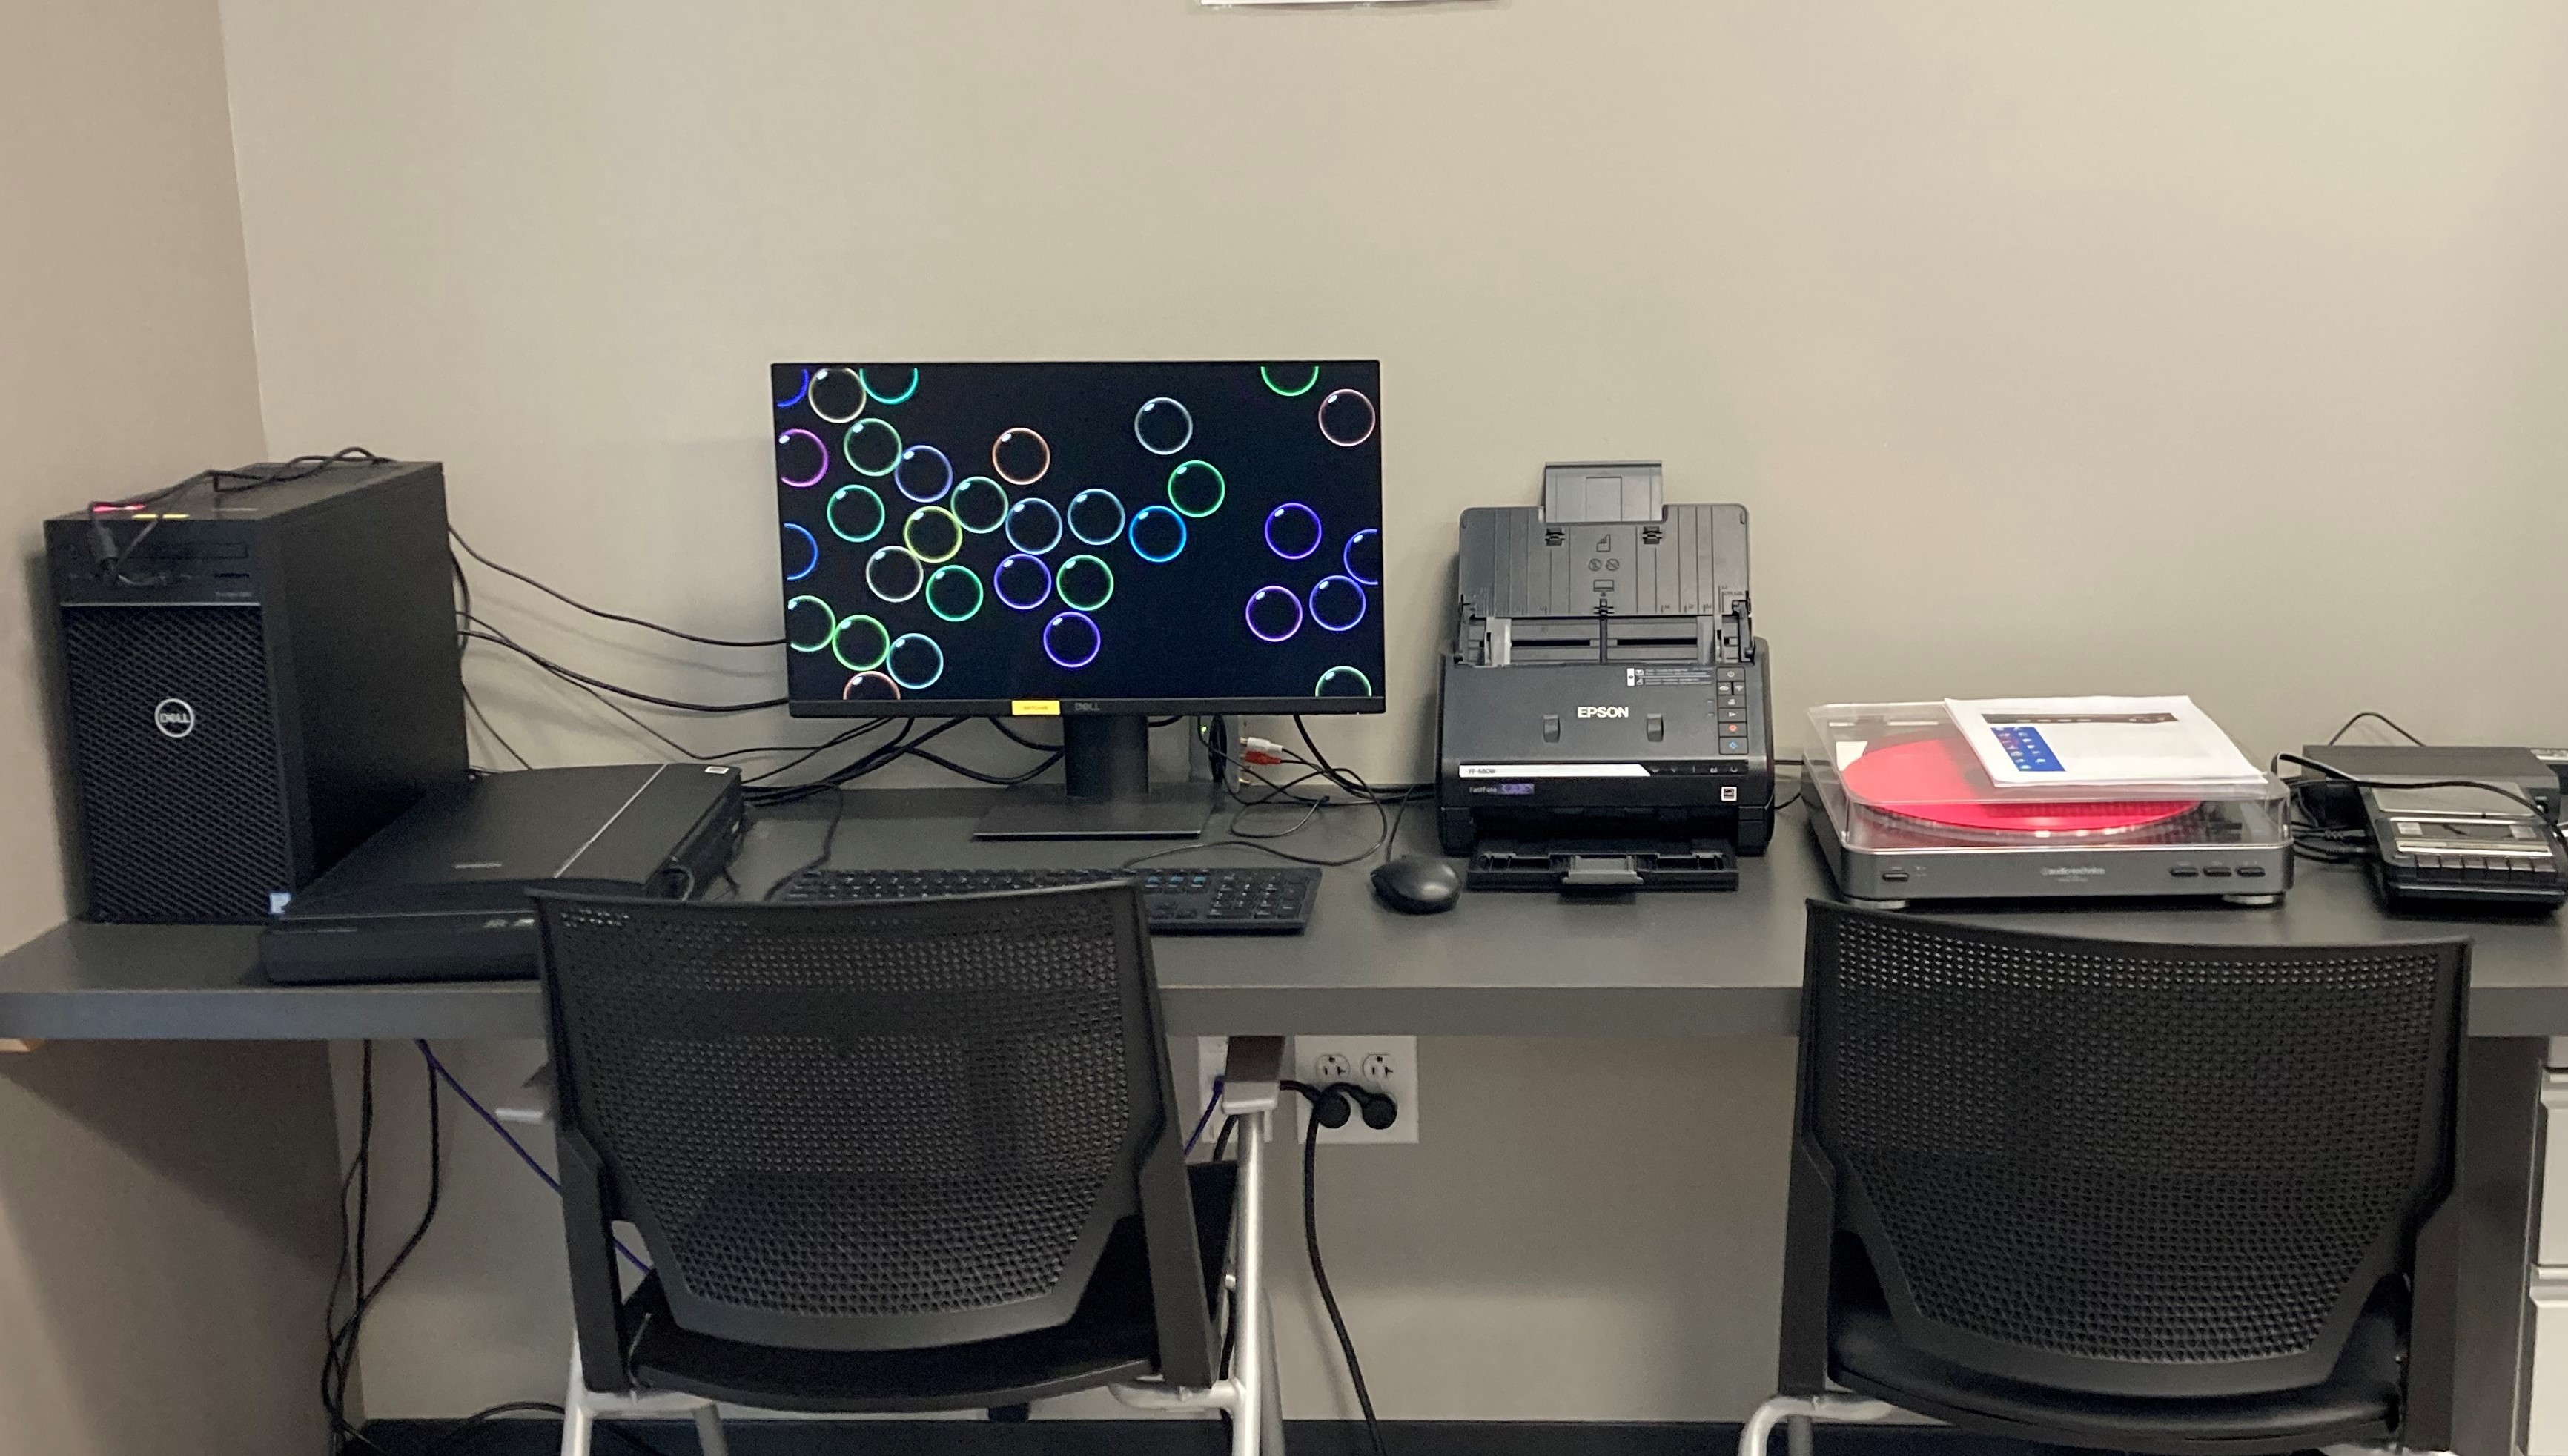 Makerspace Photo/ Document Scanning and Audio Conversion Station